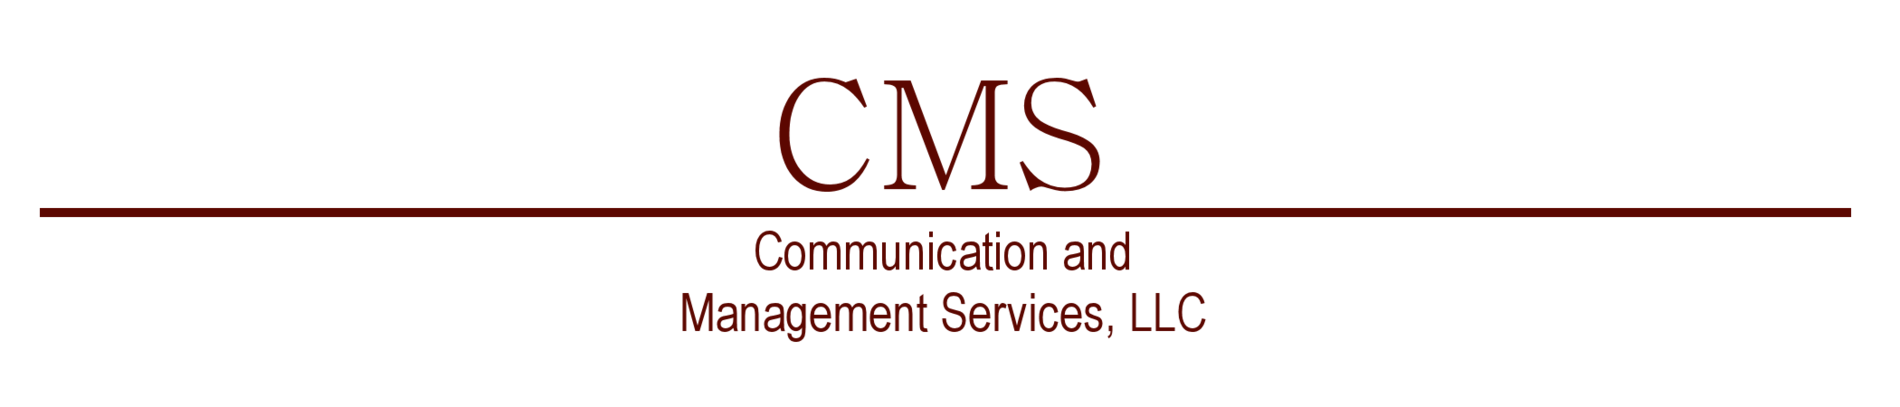 About-CMS